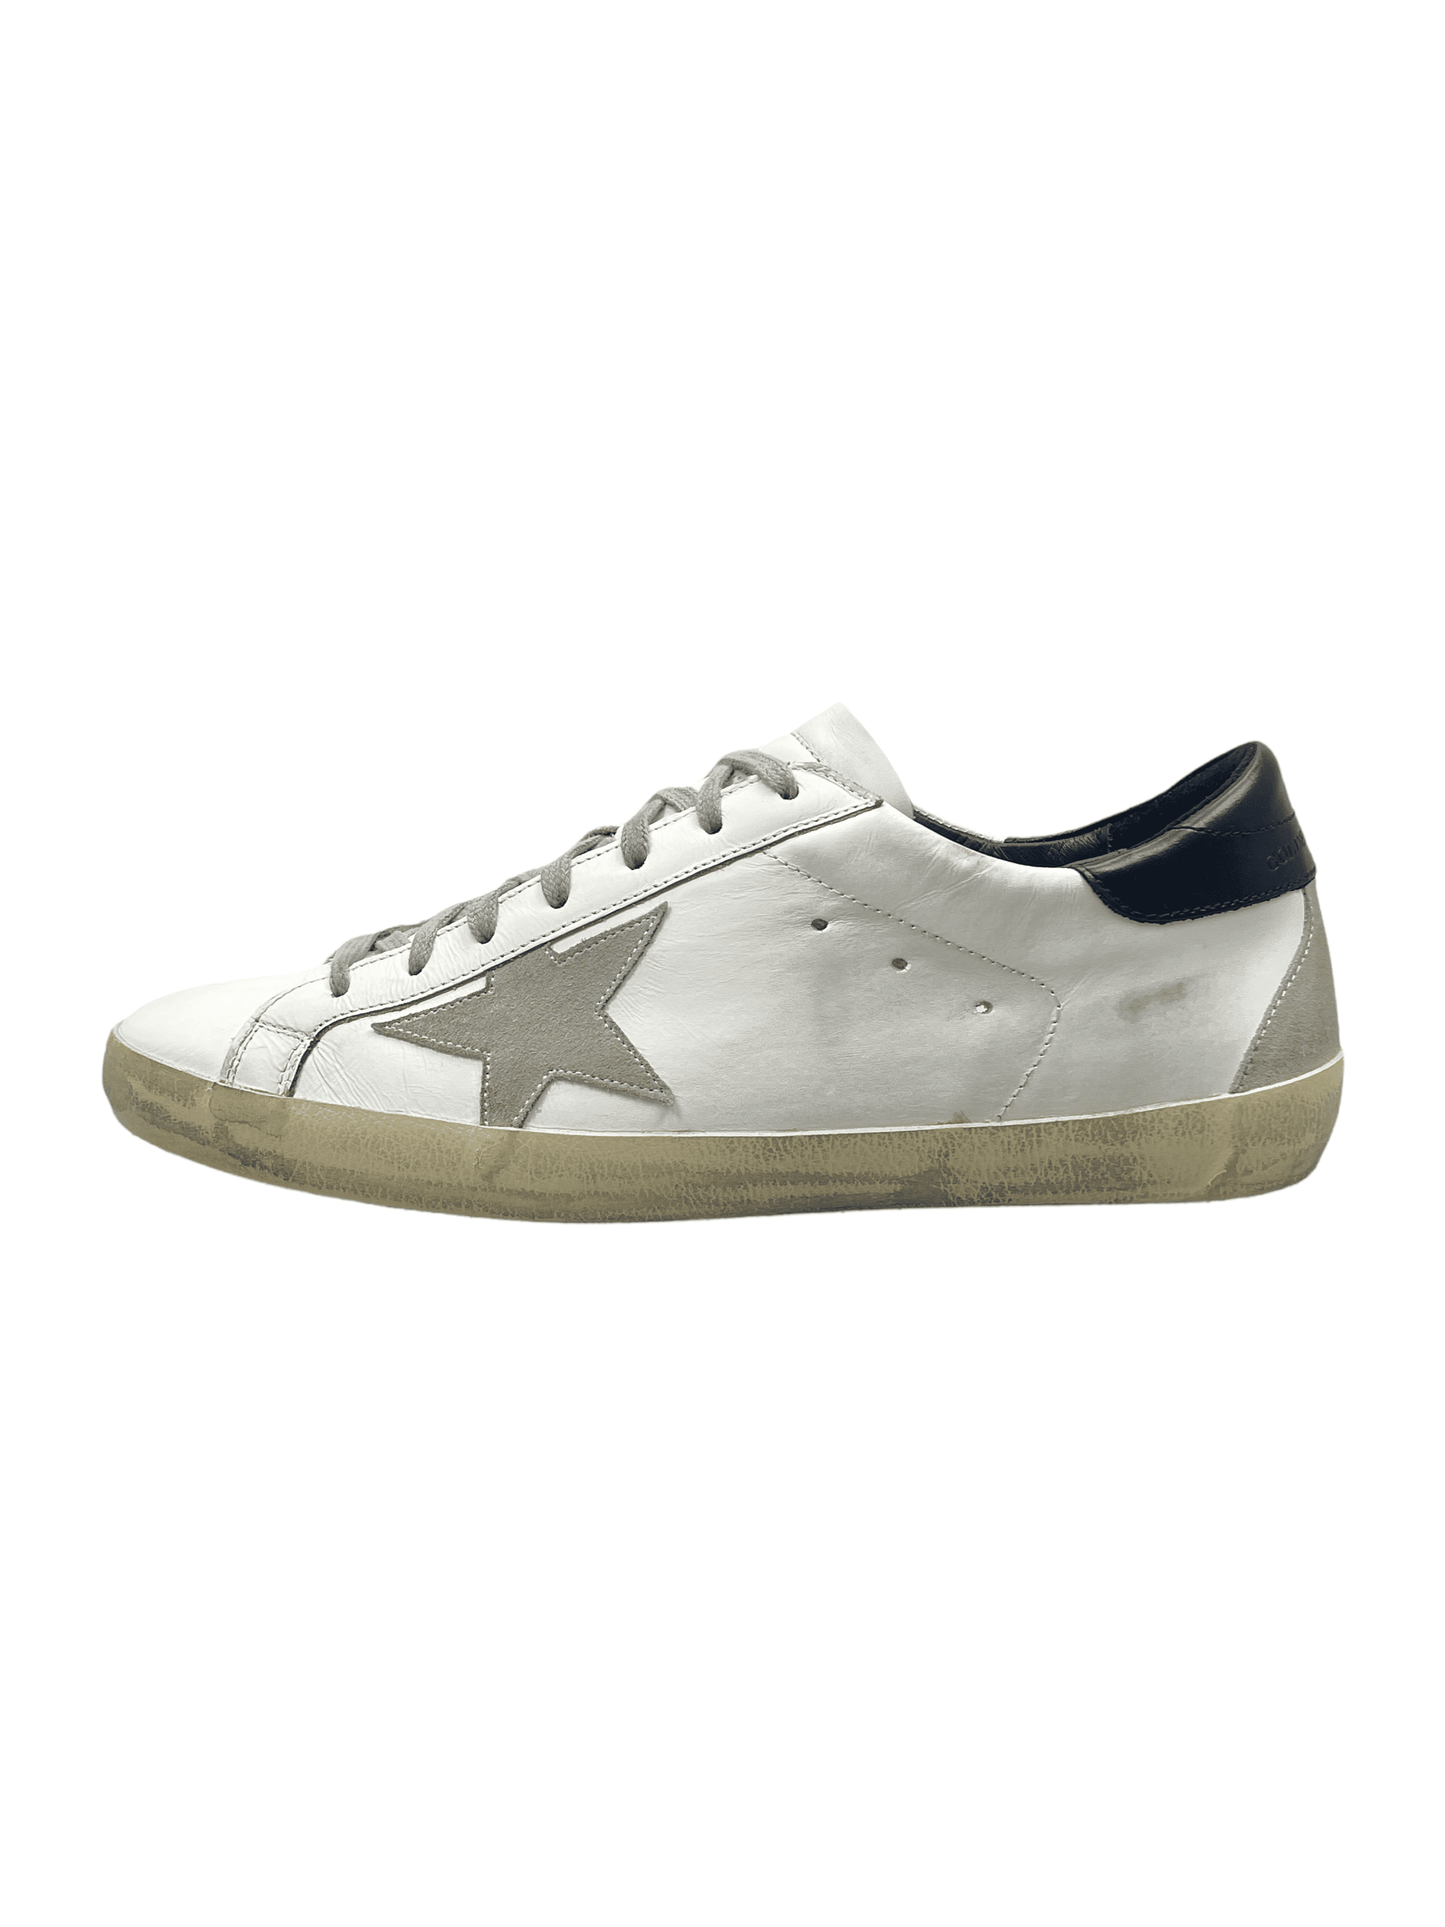 Golden Goose Superstar White Grey Navy 9 US - Genuine Design Luxury Consignment for Men. New & Pre-Owned Clothing, Shoes, & Accessories. Calgary, Canada